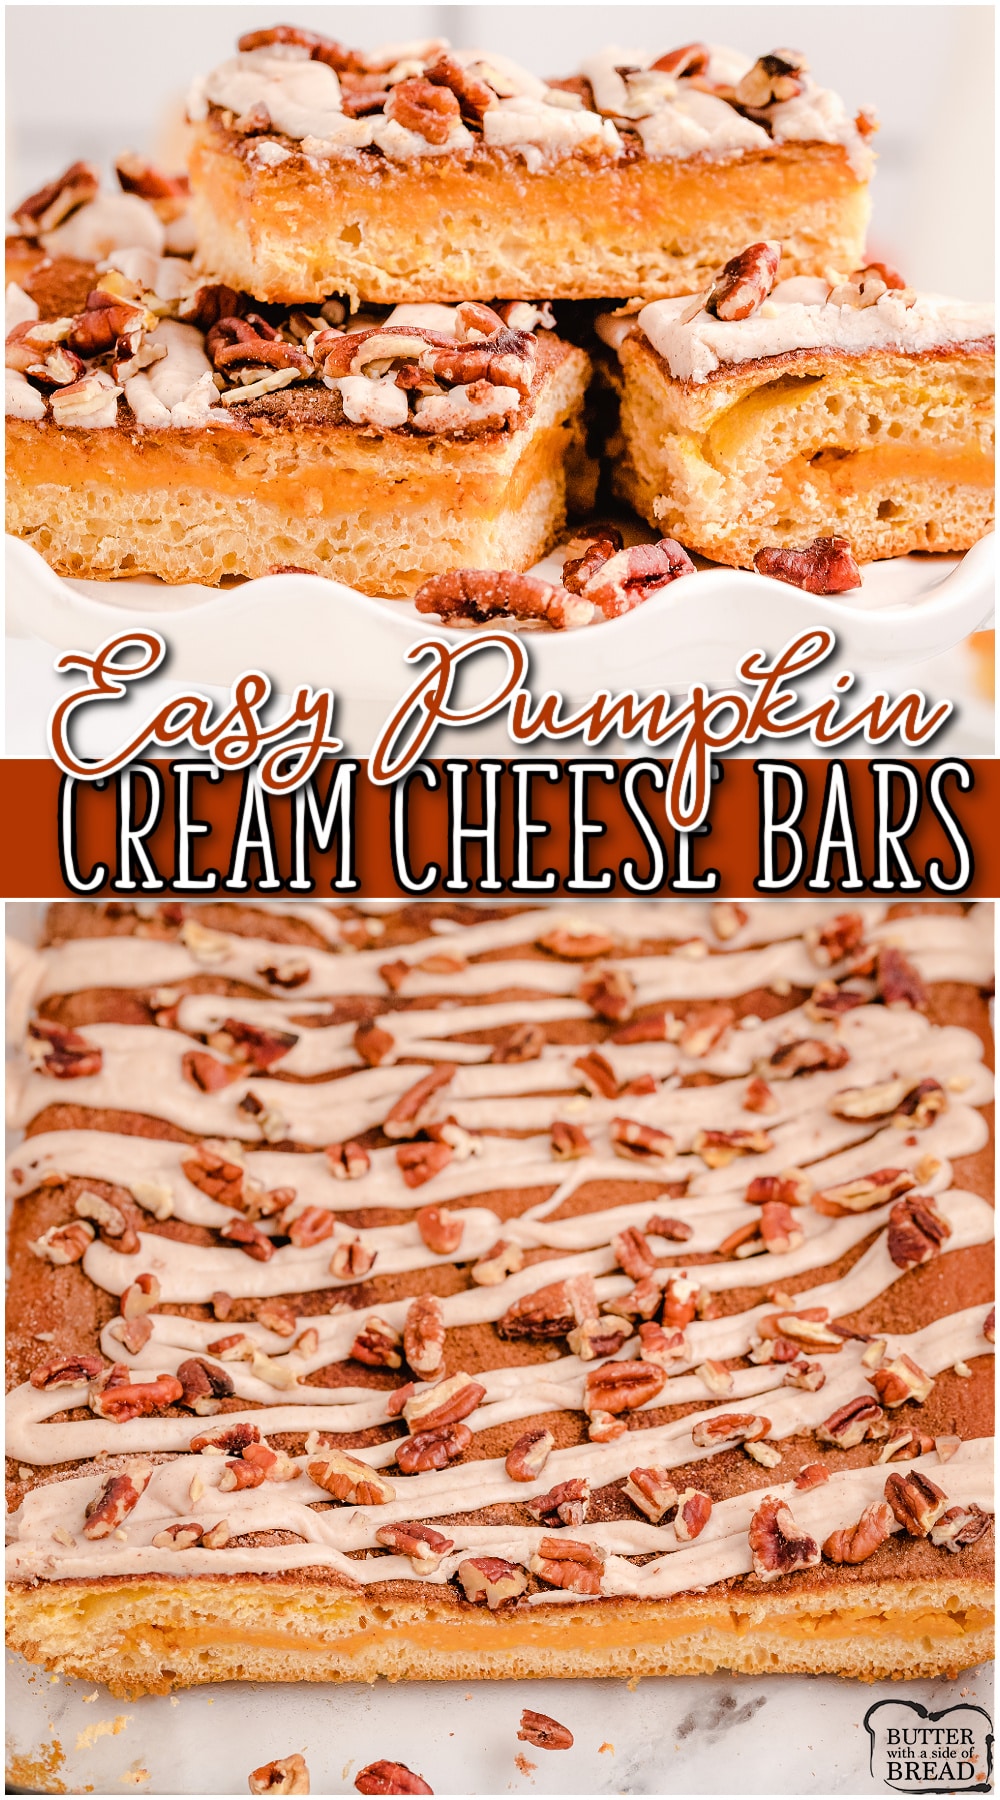 Pumpkin Cream Cheese Bars made with crescent dough, cream cheese & spiced pumpkin! Cheesecake pumpkin bars have great Fall flavors & are perfect for brunch or dessert!